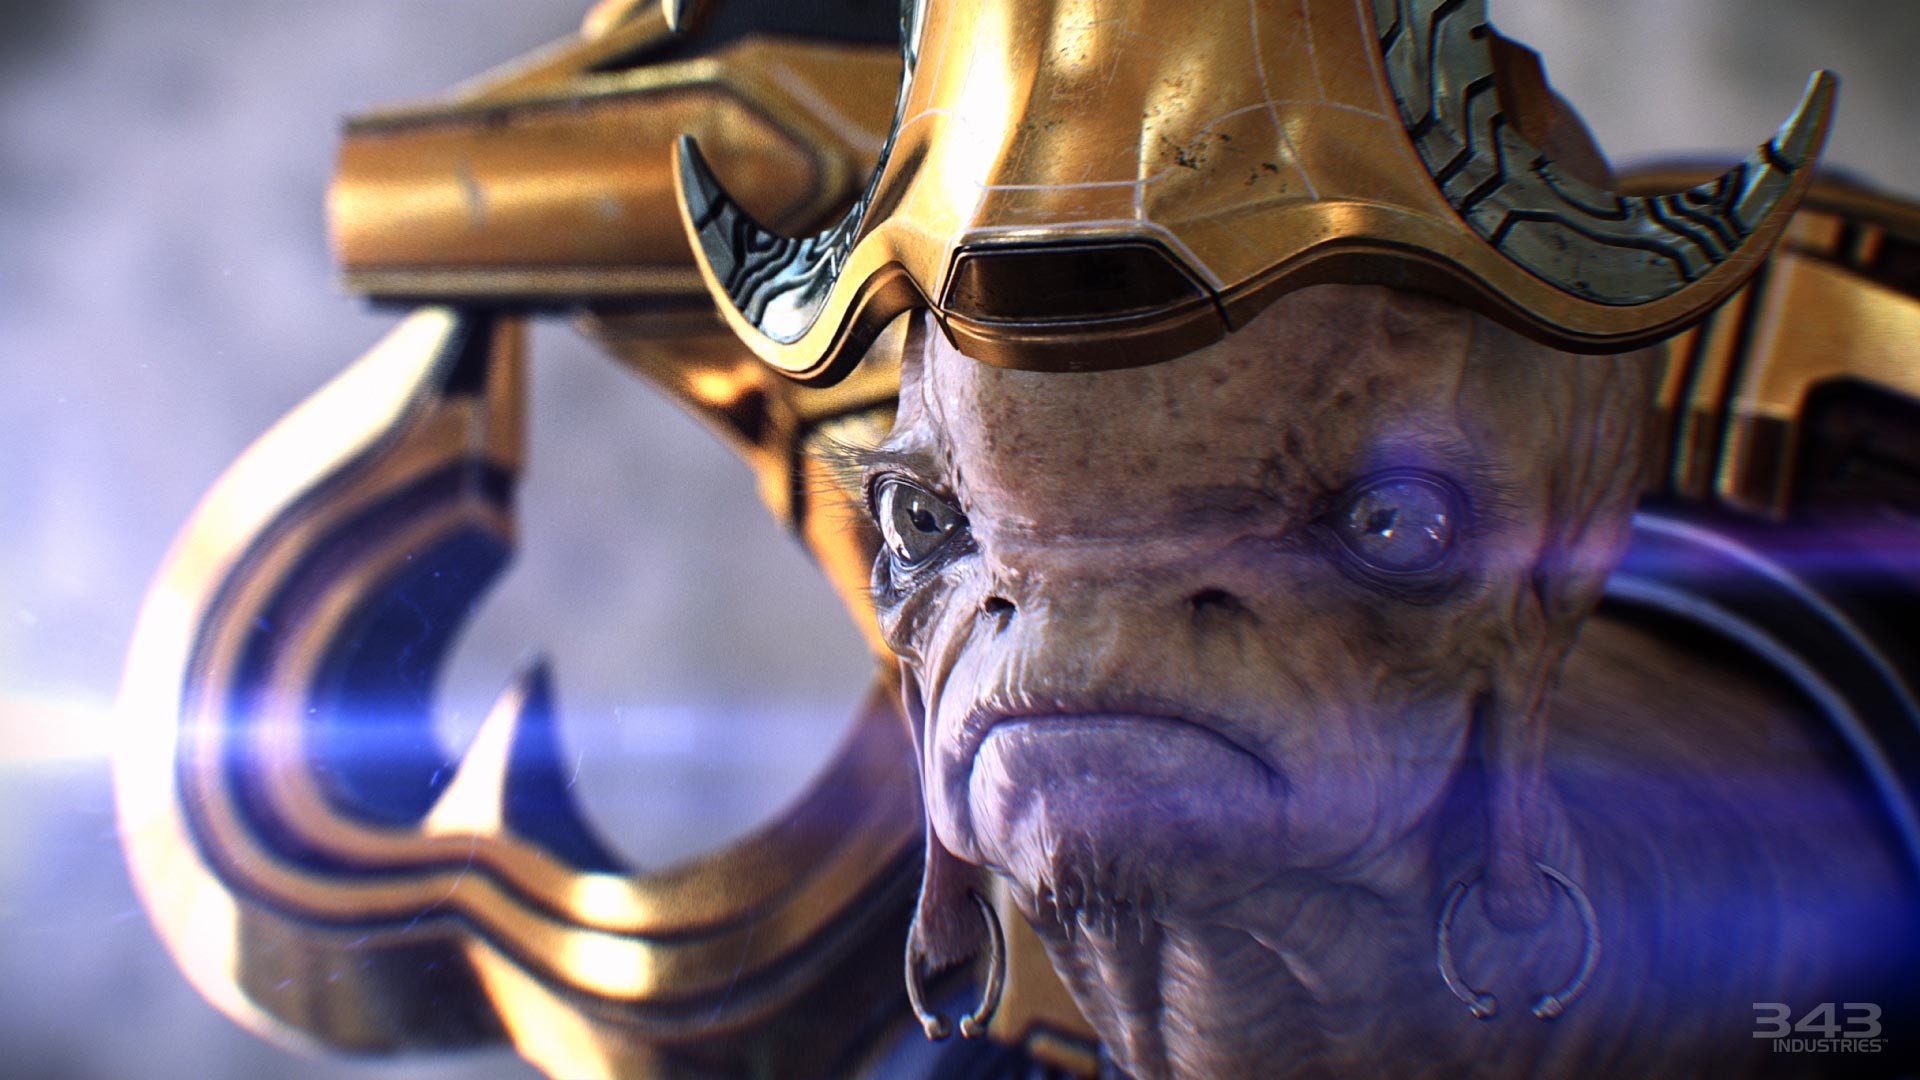 The High Prophet of Regret, a character with wrinkled and textured brownish skin, large black eyes, and a small mouth. He is wearing an elaborate gold and black helmet with curved horns on the sides. There is a shimmering, blueish light in the background which reflects off the helmet, adding to the futuristic aesthetic.